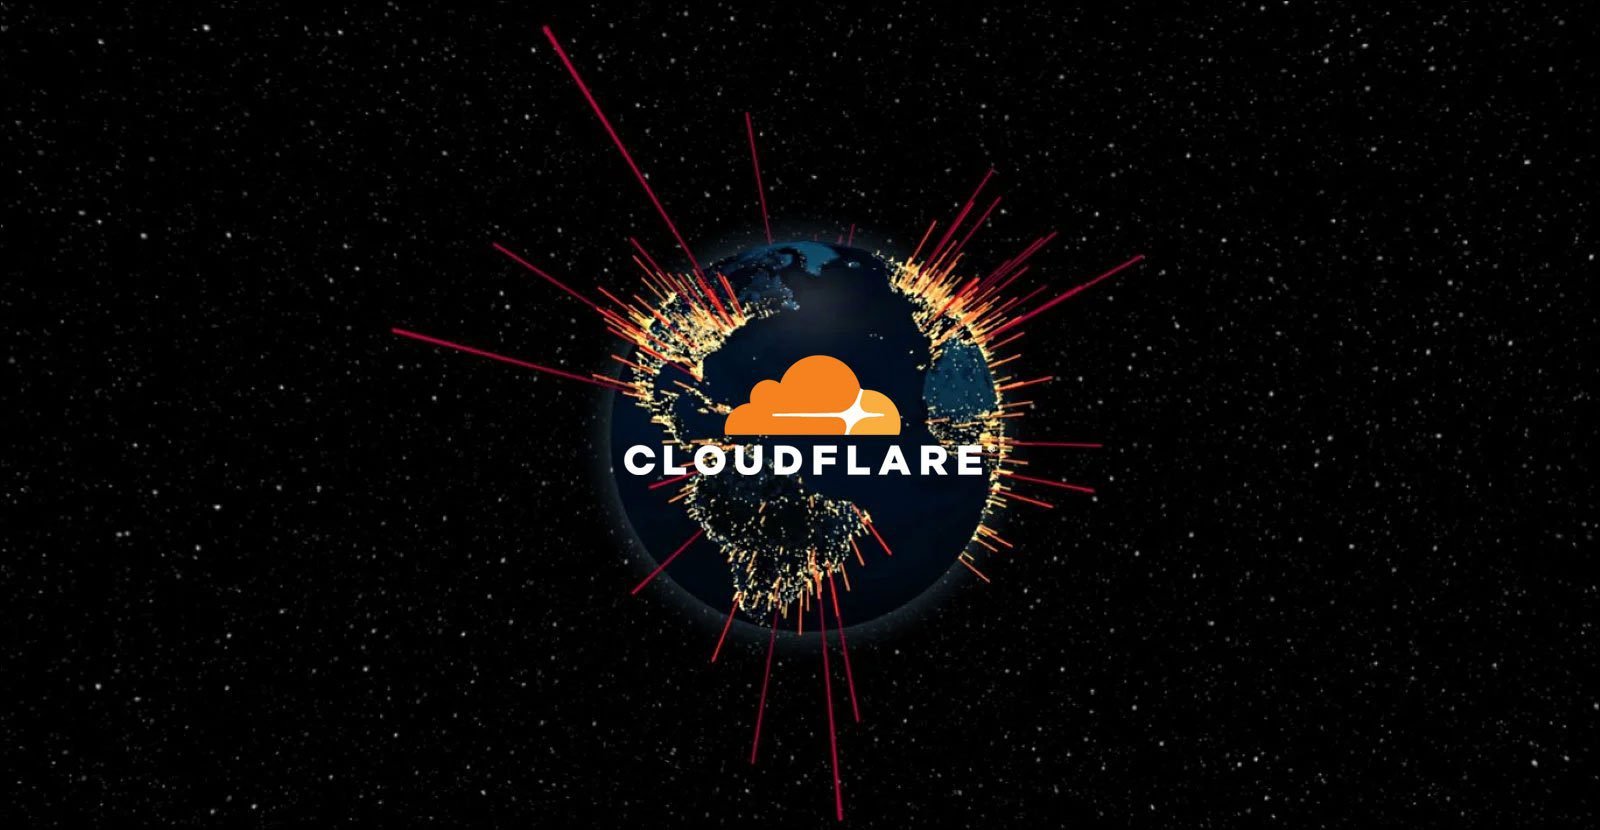 Cloudflare raises monthly plan prices for the first time